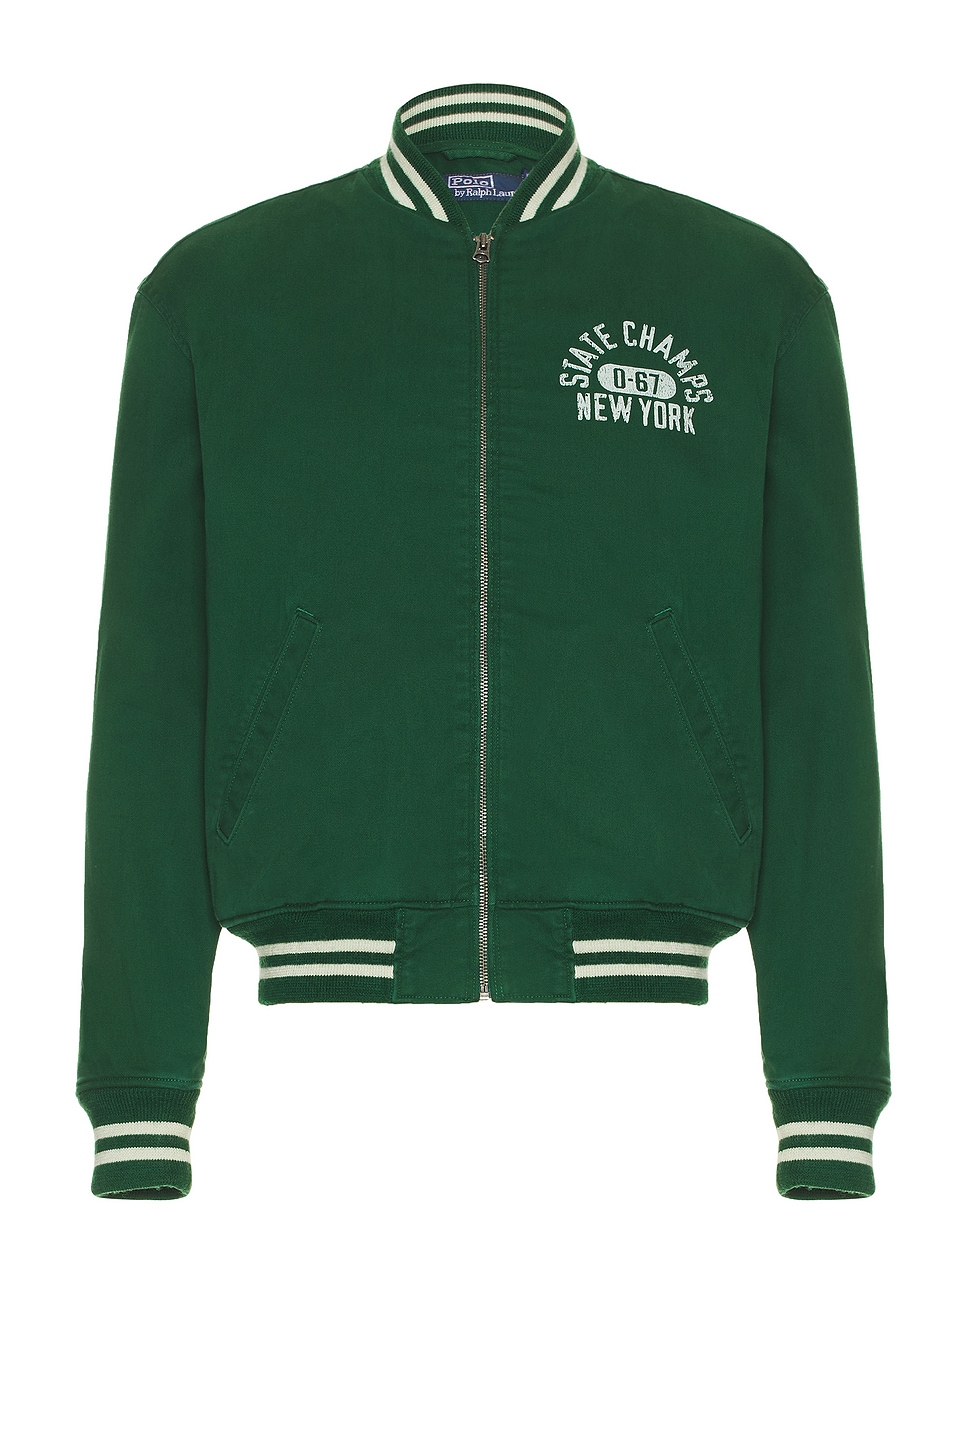 Image 1 of Polo Ralph Lauren Athletic Club Bomber Jacket in New Forest